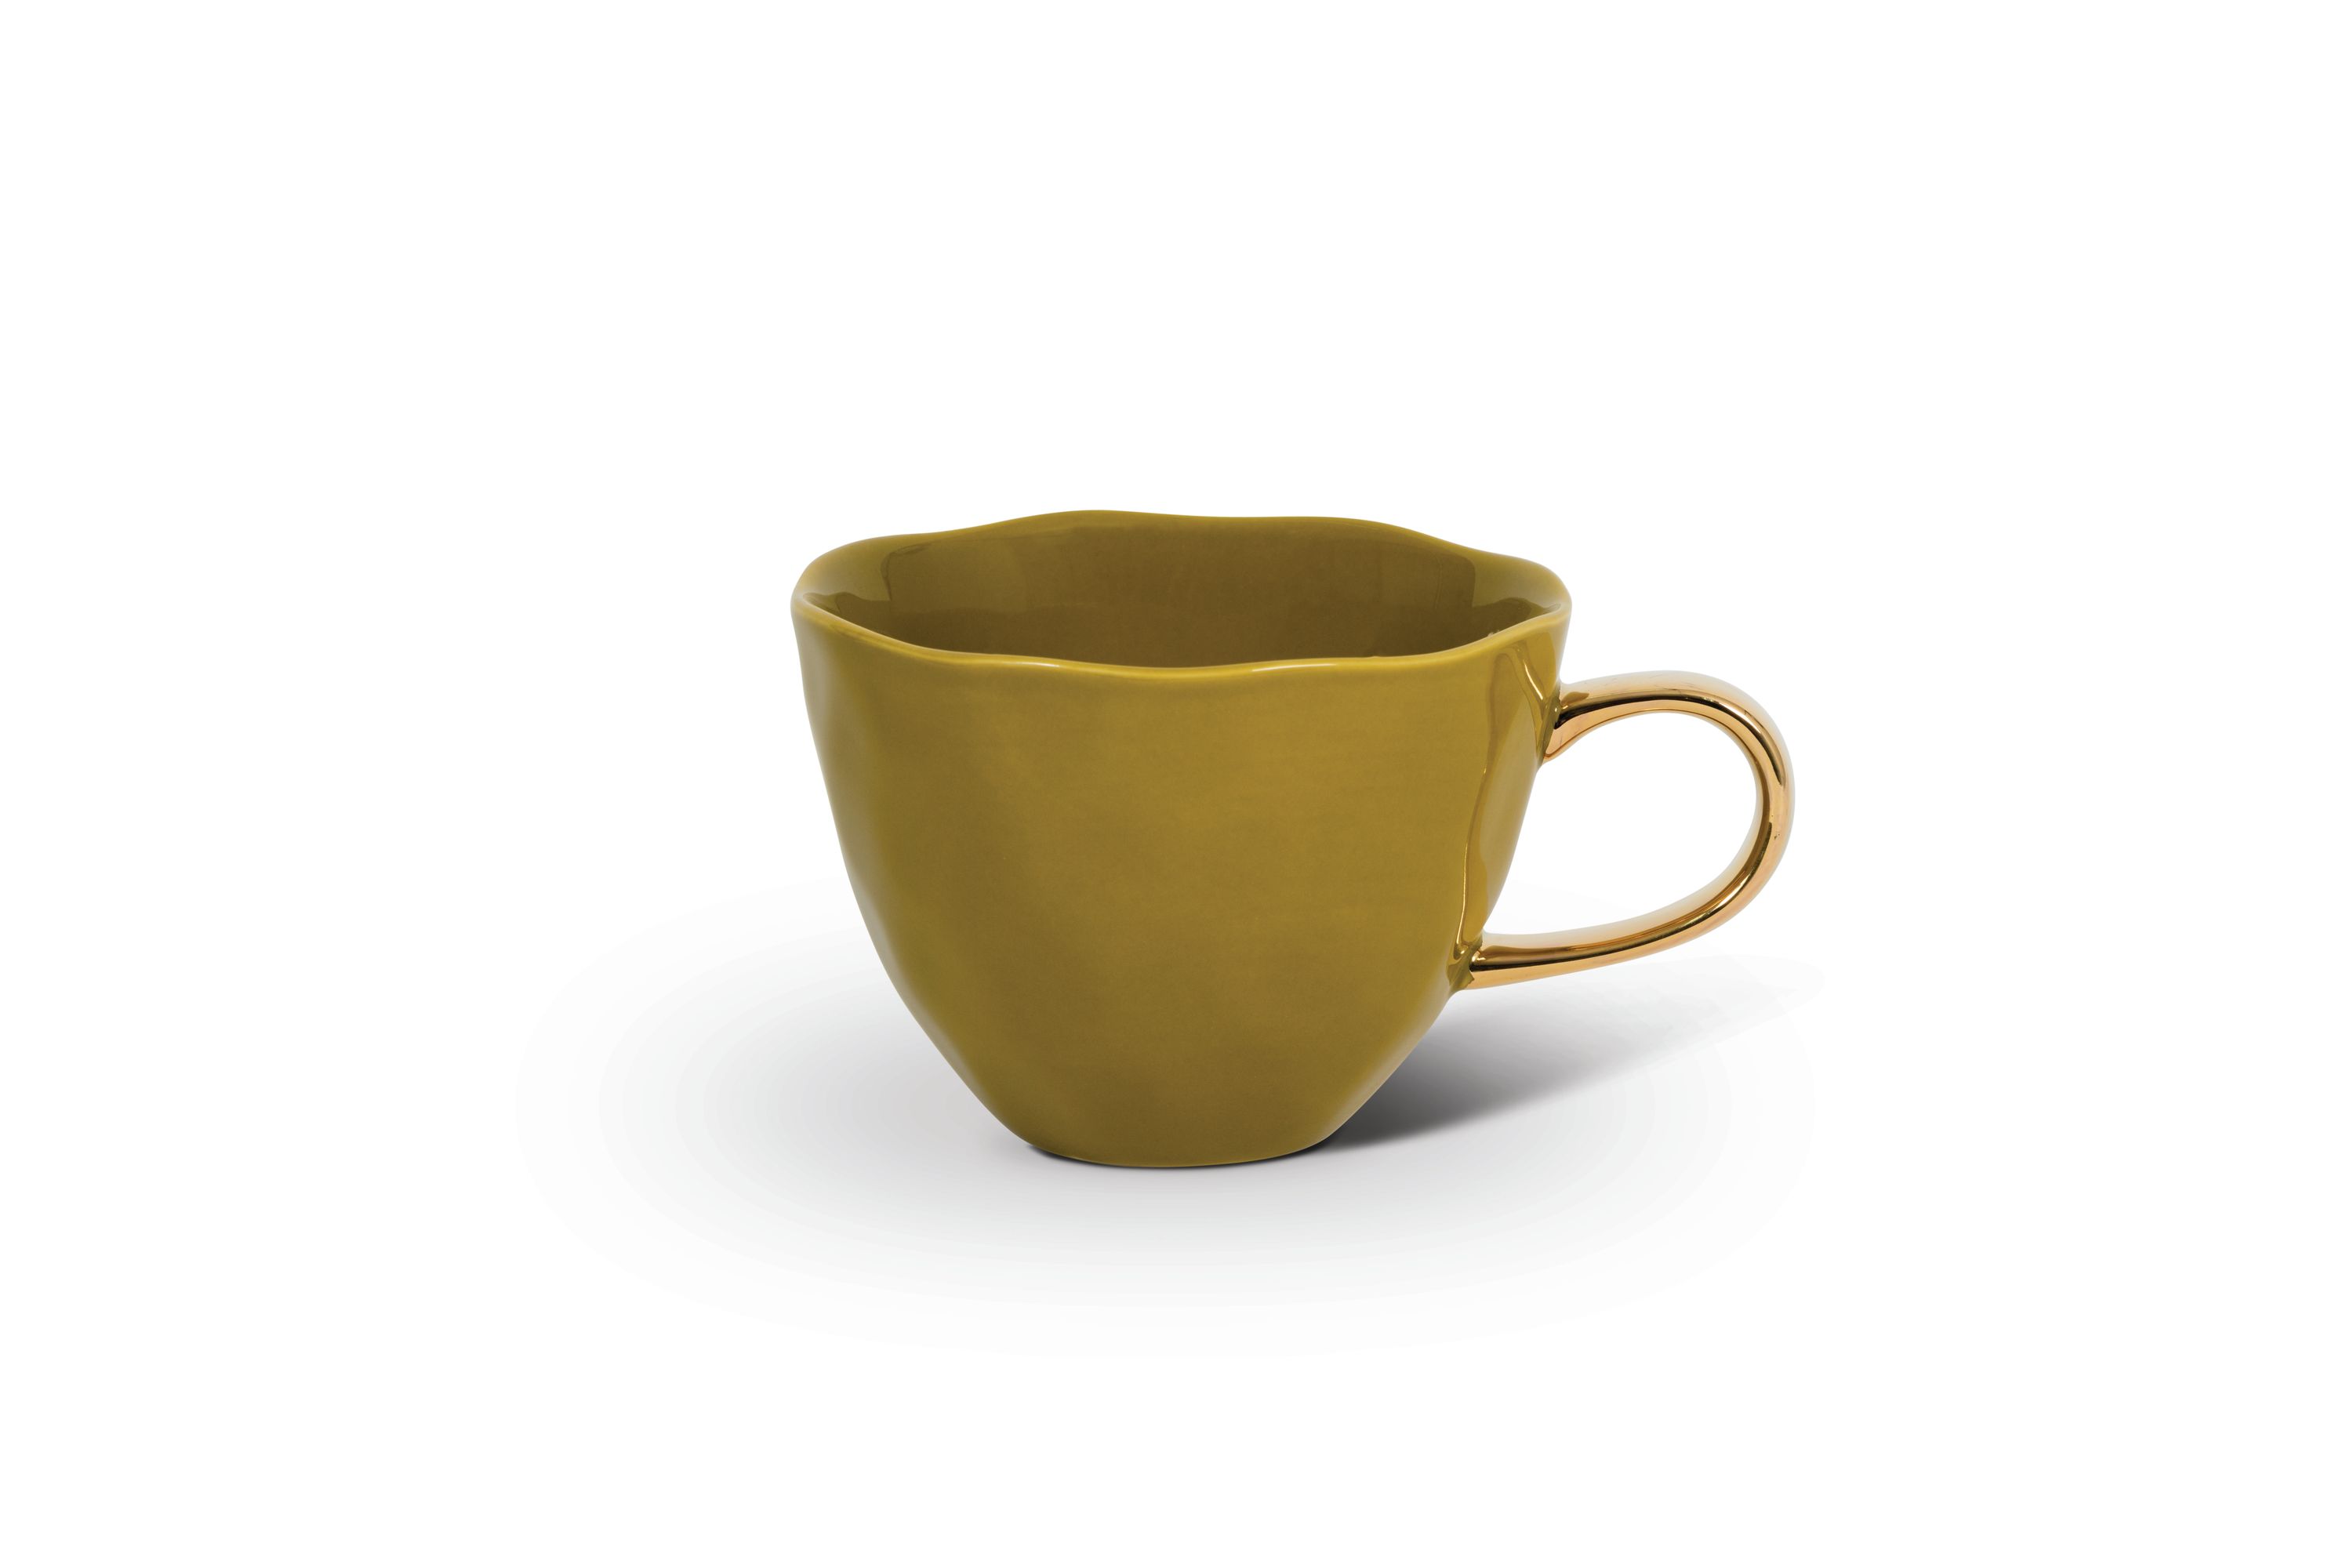 Unc Good Morning Cup Cappuccino/tea Amber Green Gift